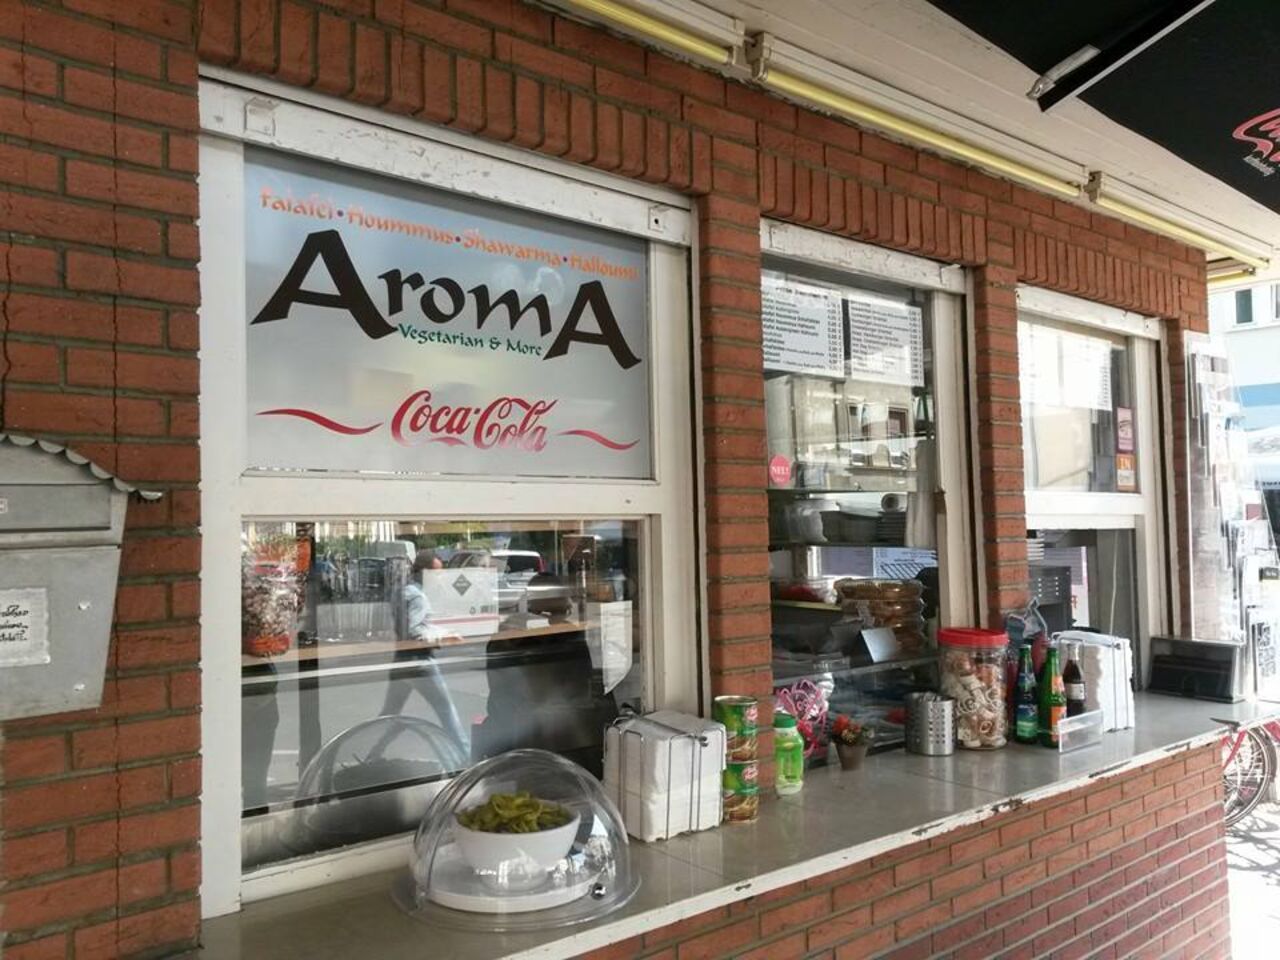 A photo of Aroma Vegetarian & More